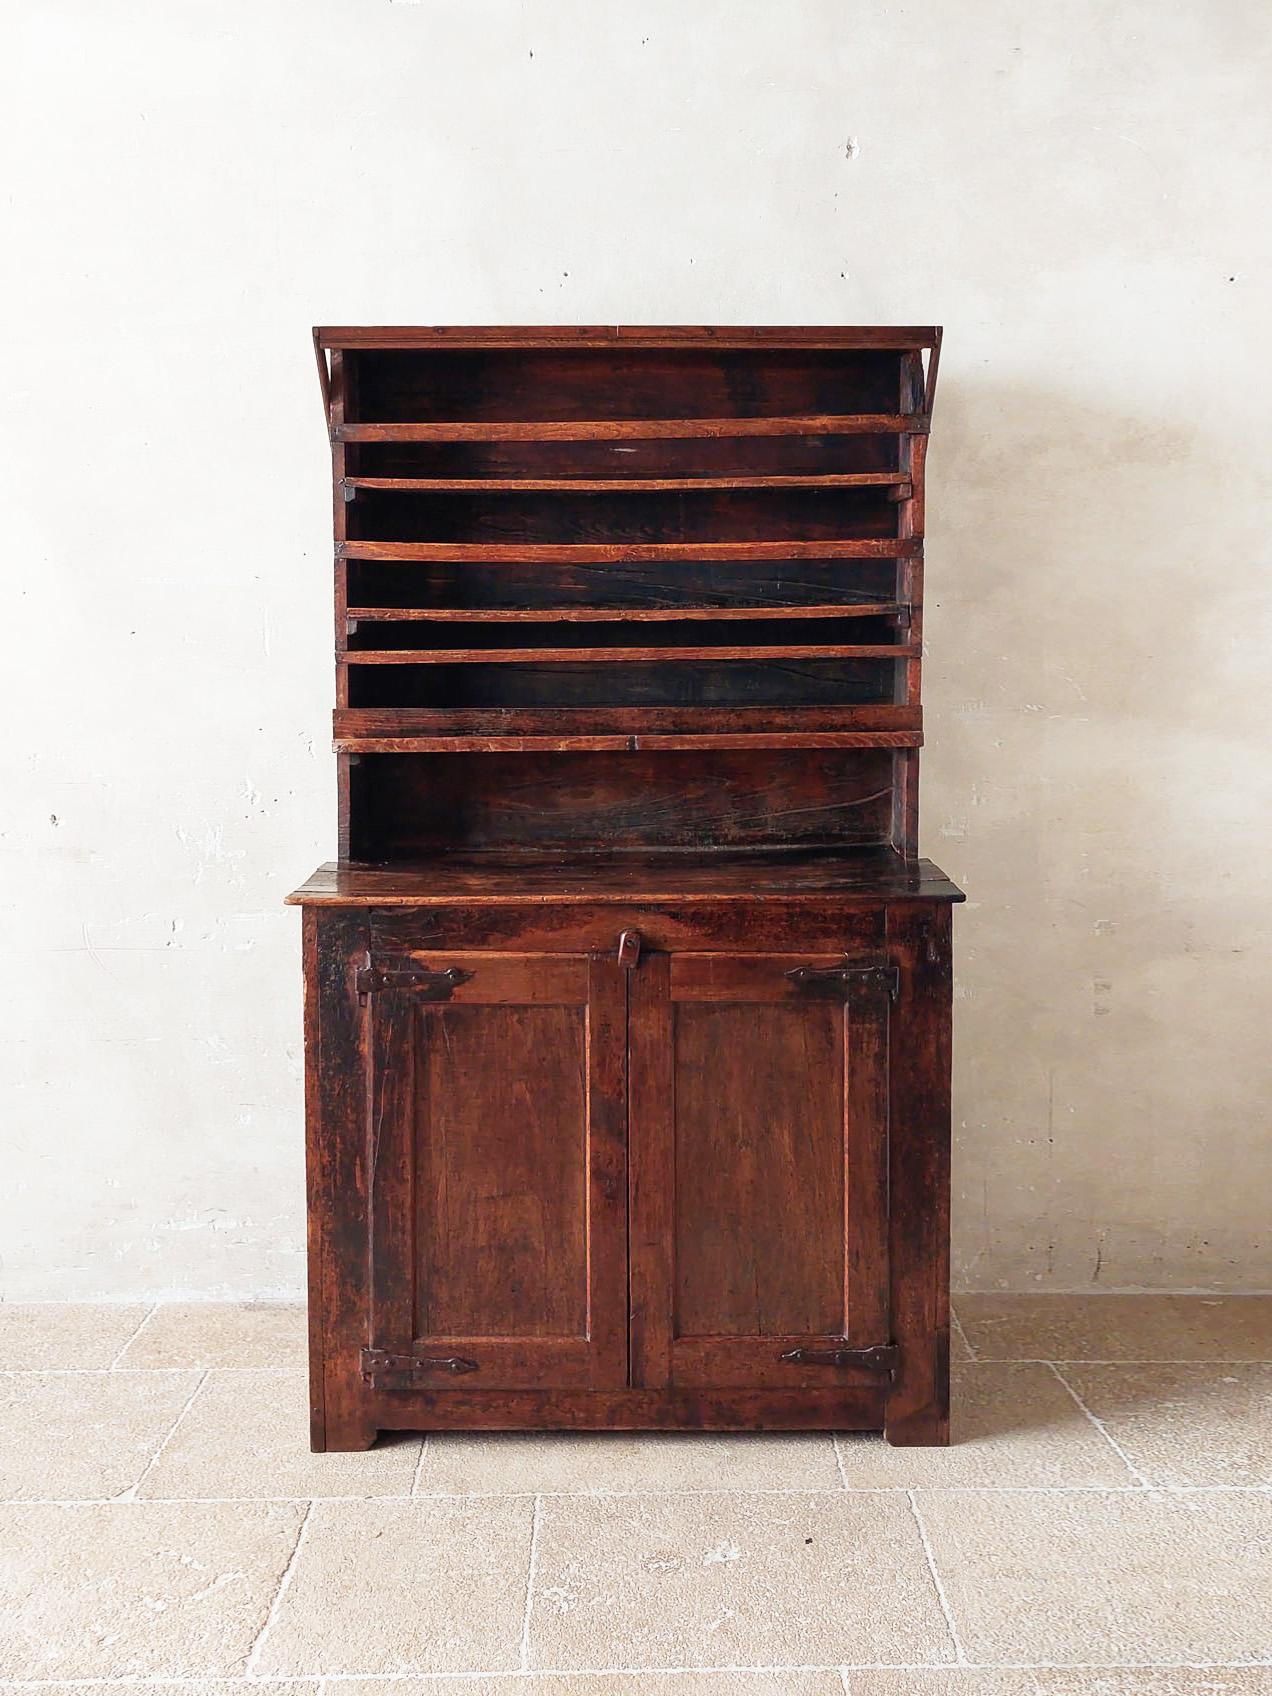 17th century rural French oak kitchen cabinet, wabi-sabi style, partly restored. This stunning primitive wooden cabinet has two doors with wrought iron hinges in the bottom compartment, with on the inside a shelve. The upper compartment has shelves